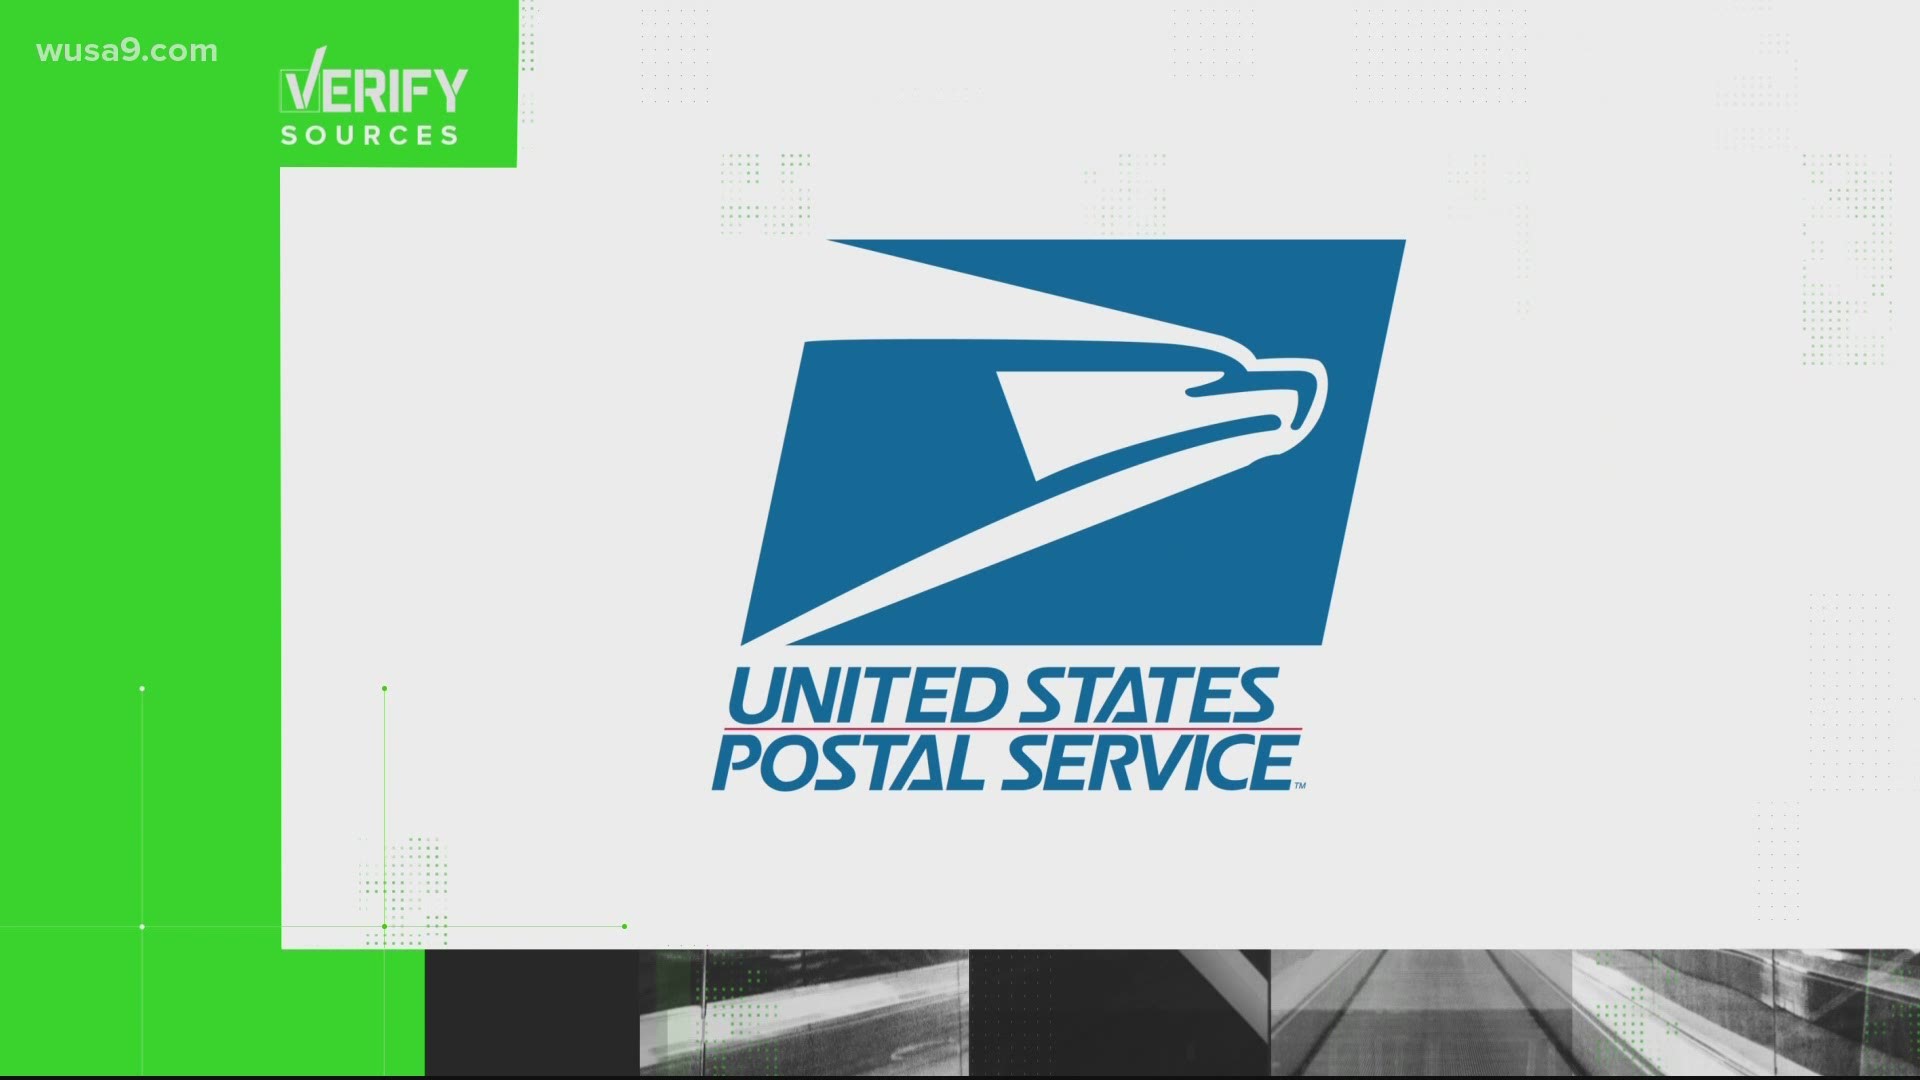 VERIFY: No, the USPS doesn't advise against mailing cash